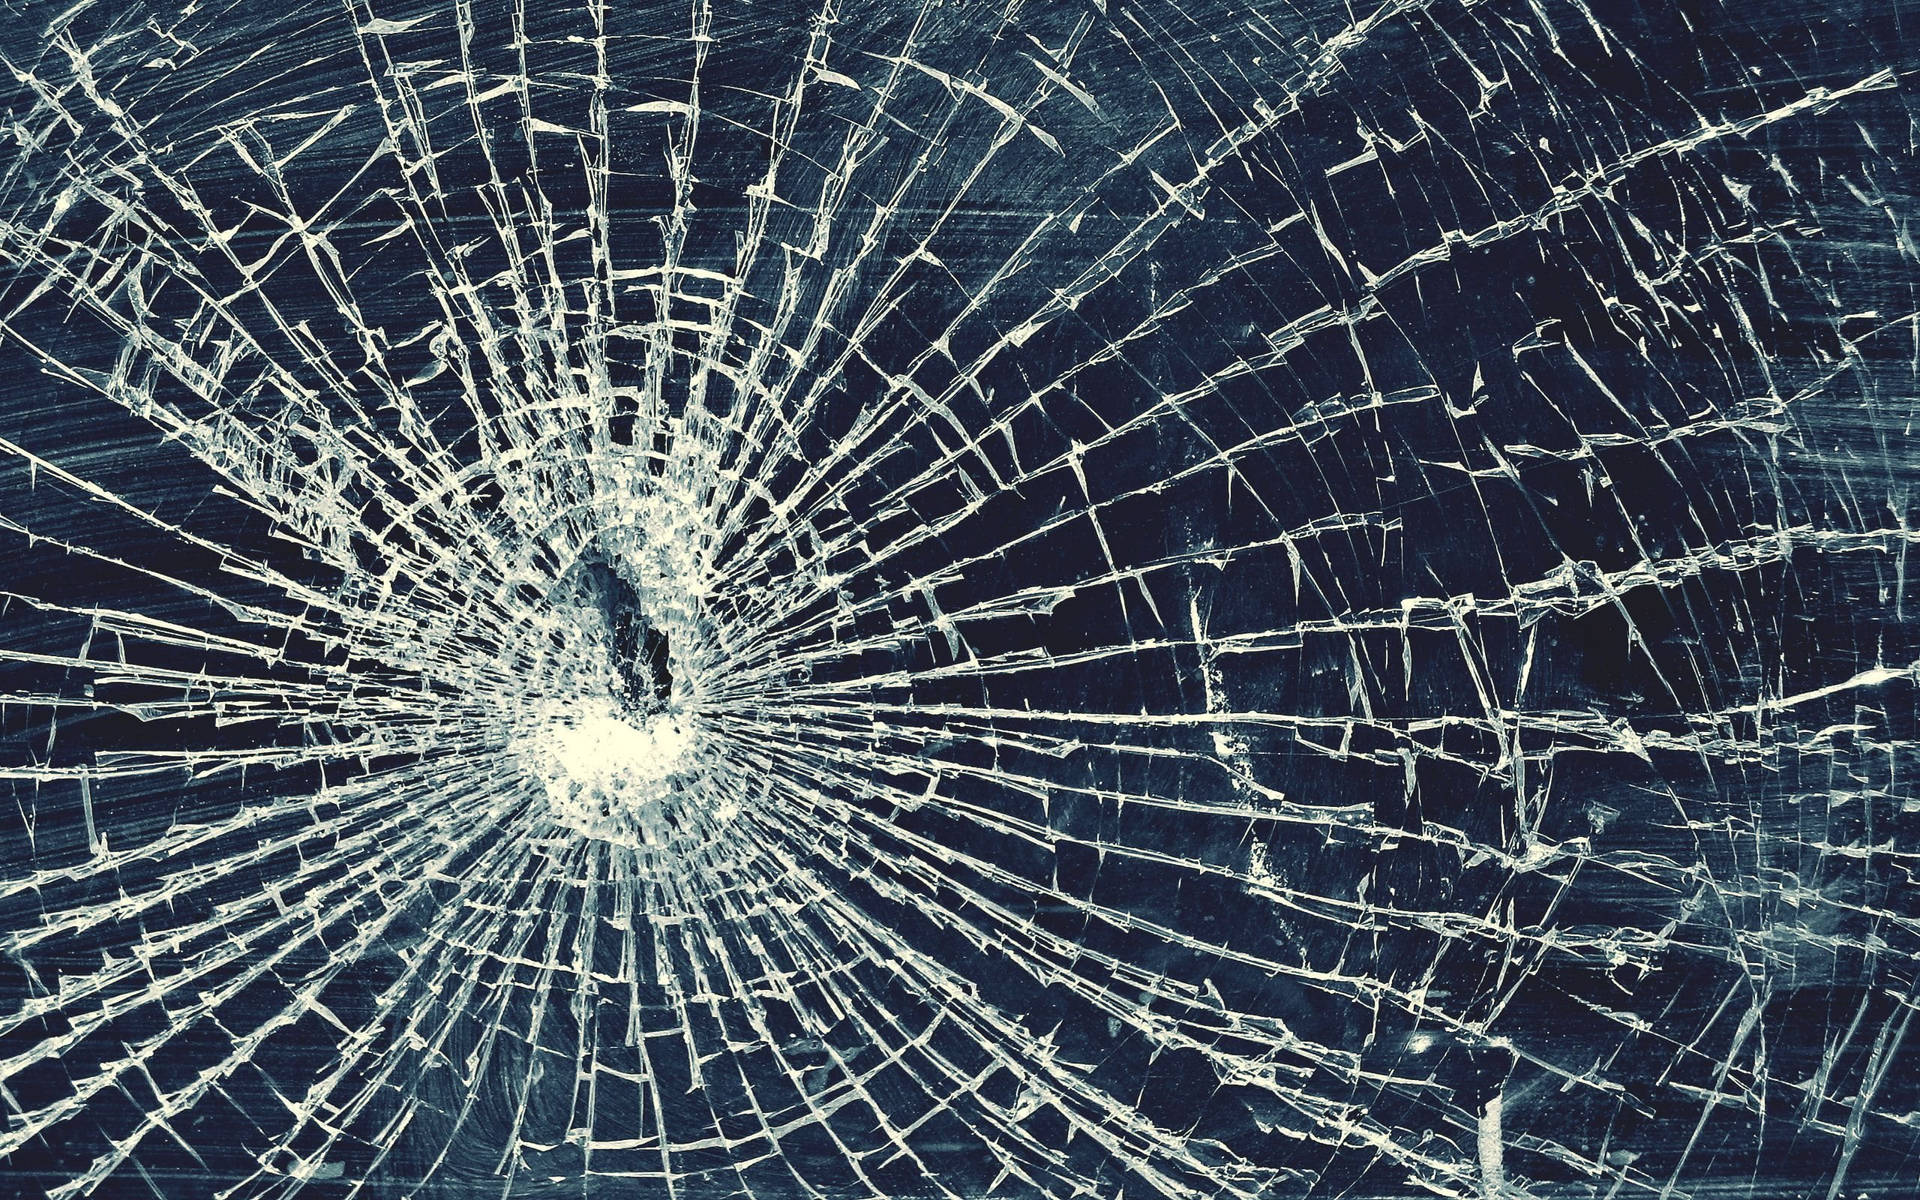 Shattered Illusions: The Artistry Of Broken Glass Background